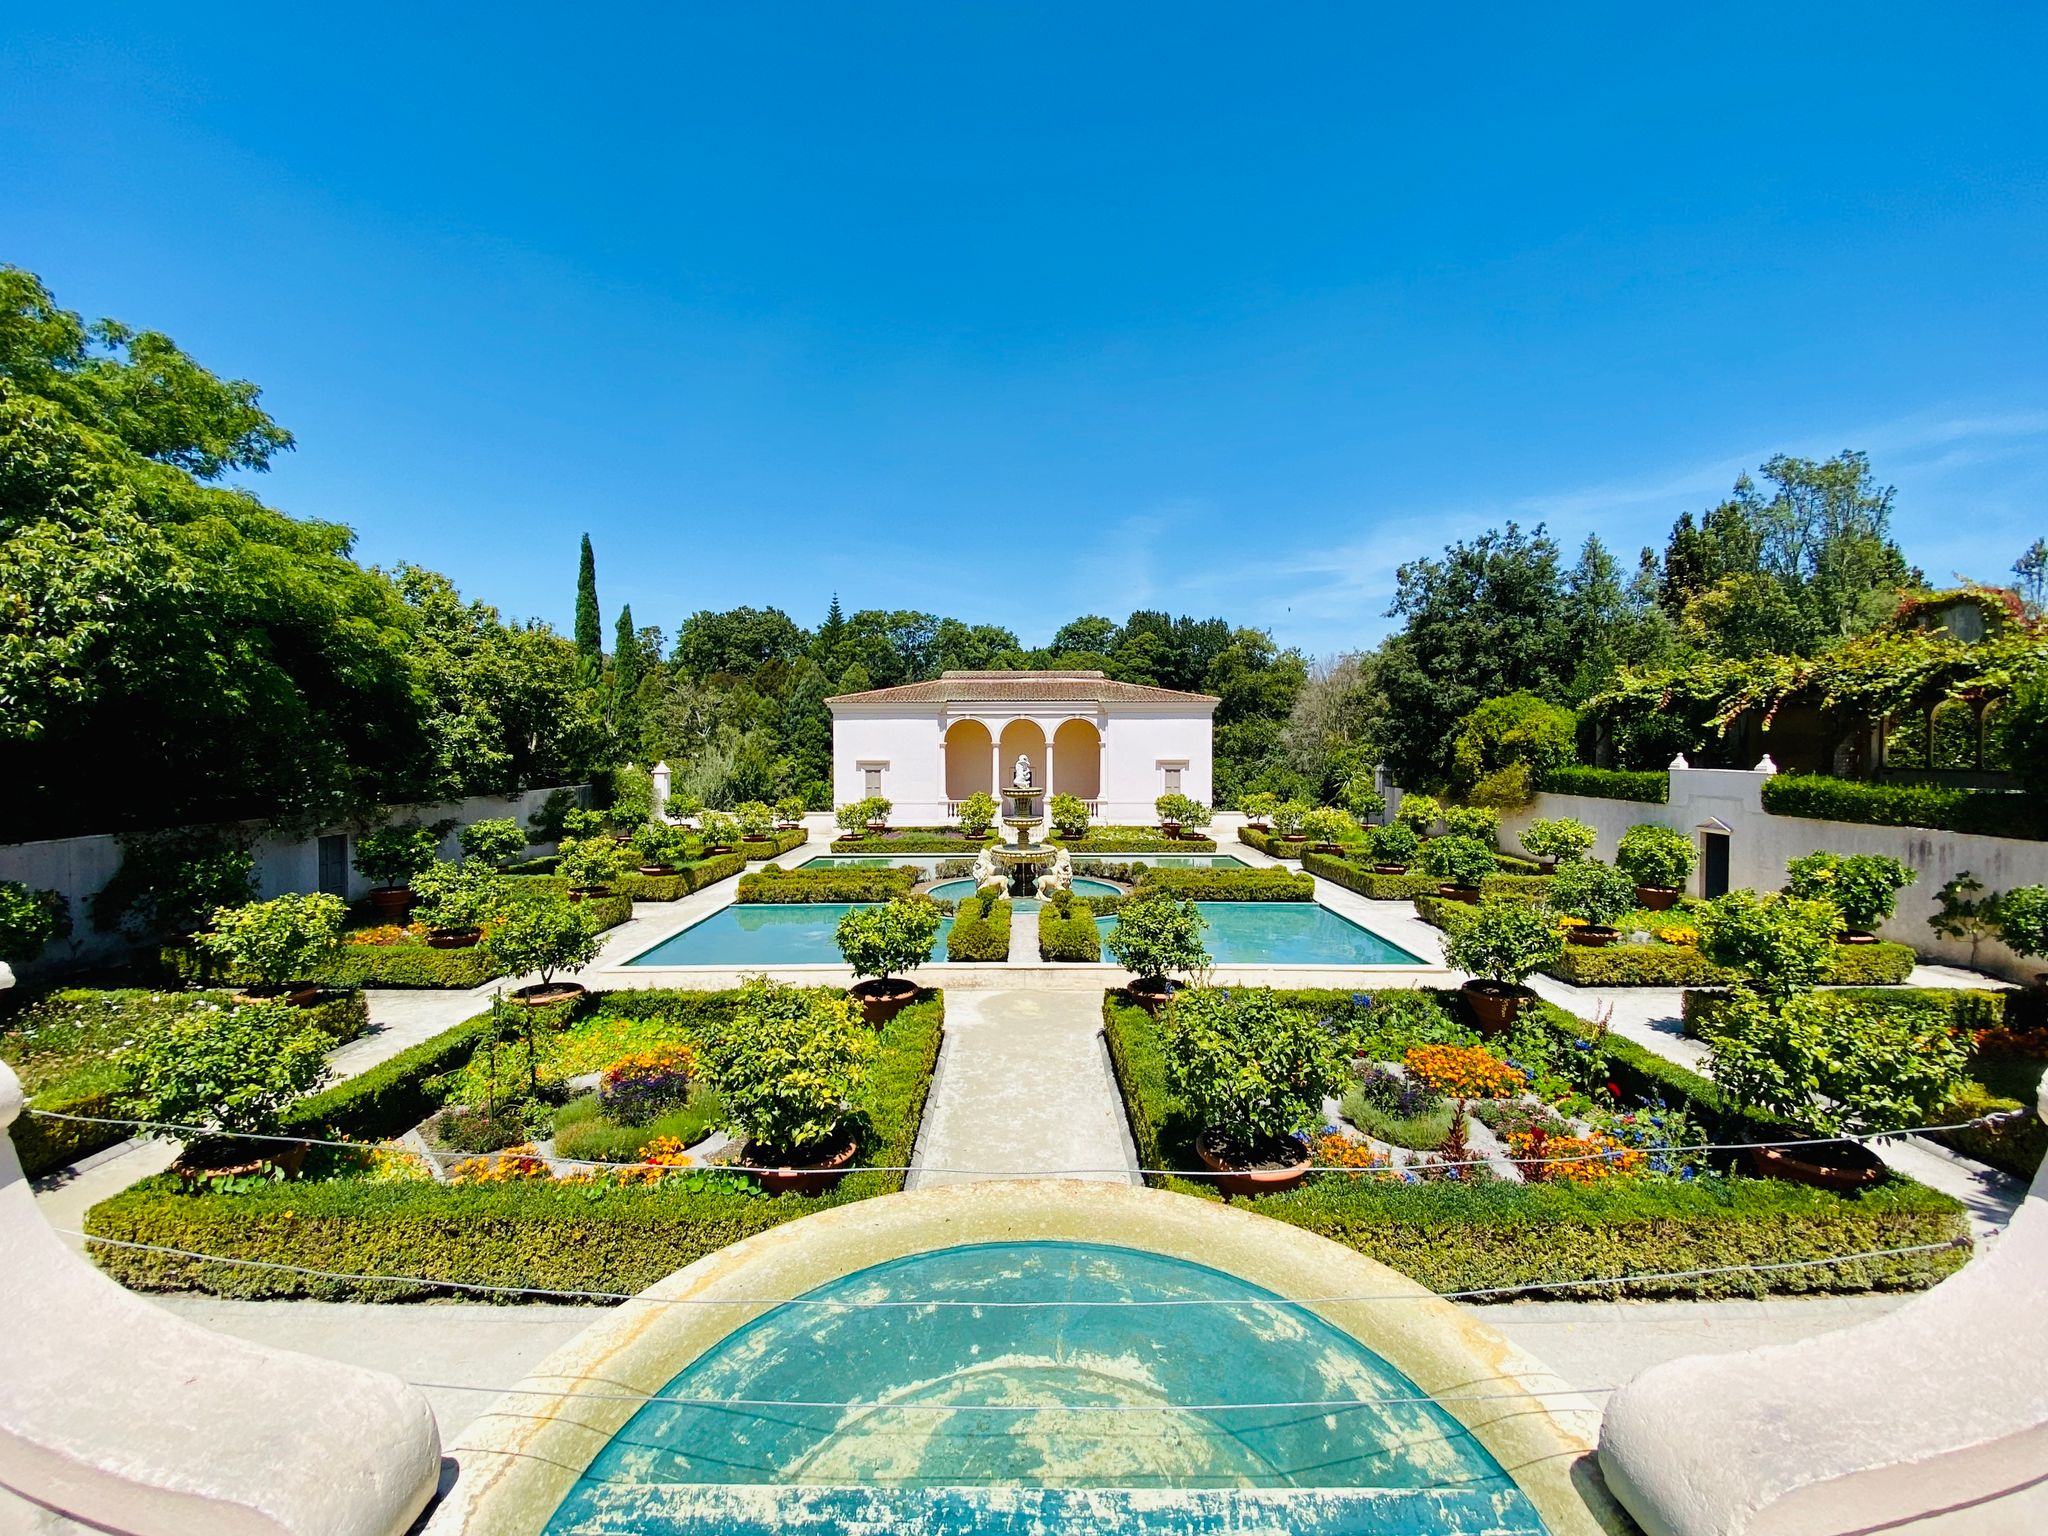 A photo of a quite large garden done in an Italian Renaissance style, with marble and statues and greenery.